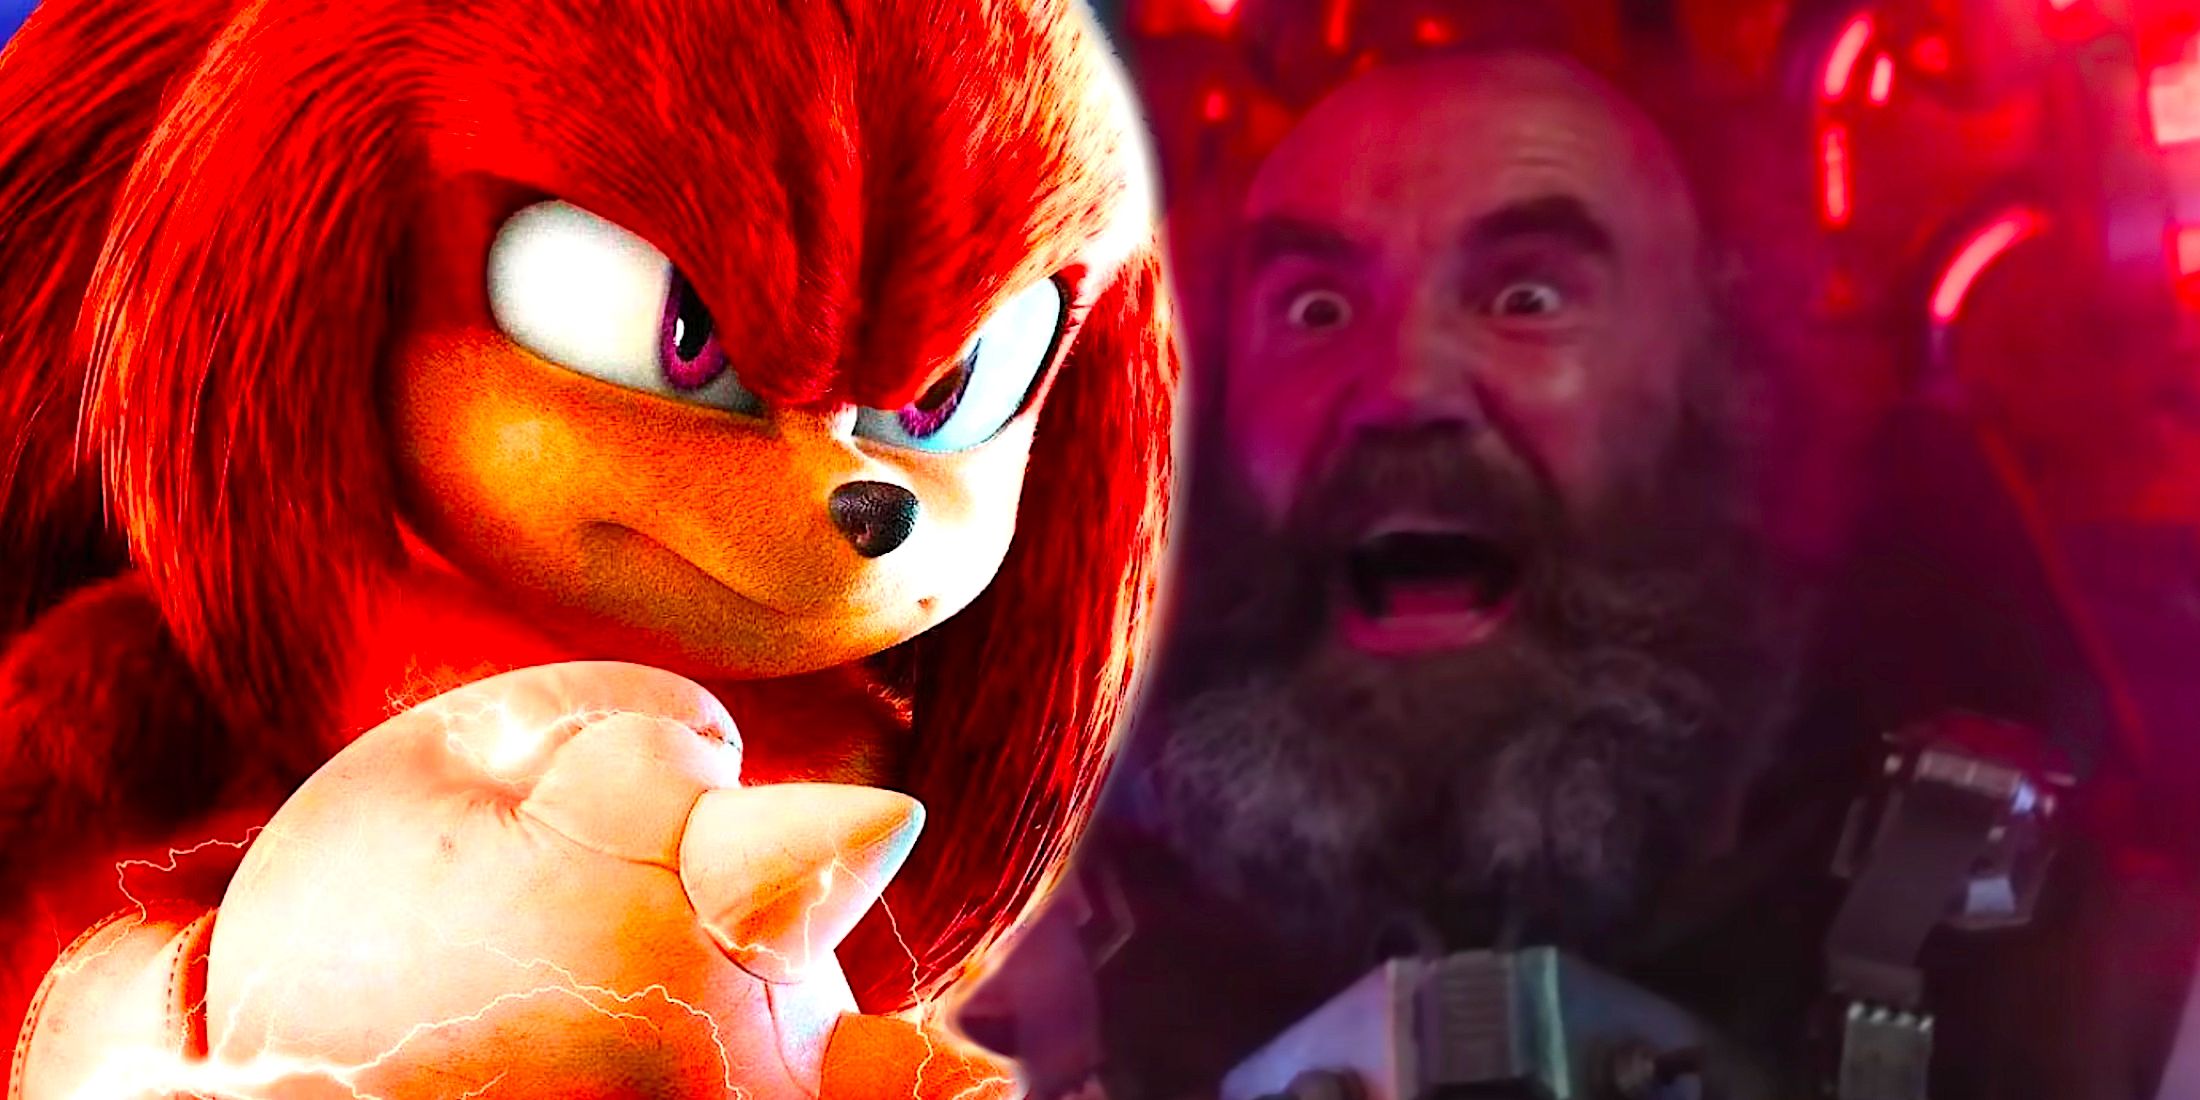 Knuckles looks confident in Sonic the Hedgehog 2, next to the laughing shopper in the Knuckles TV show